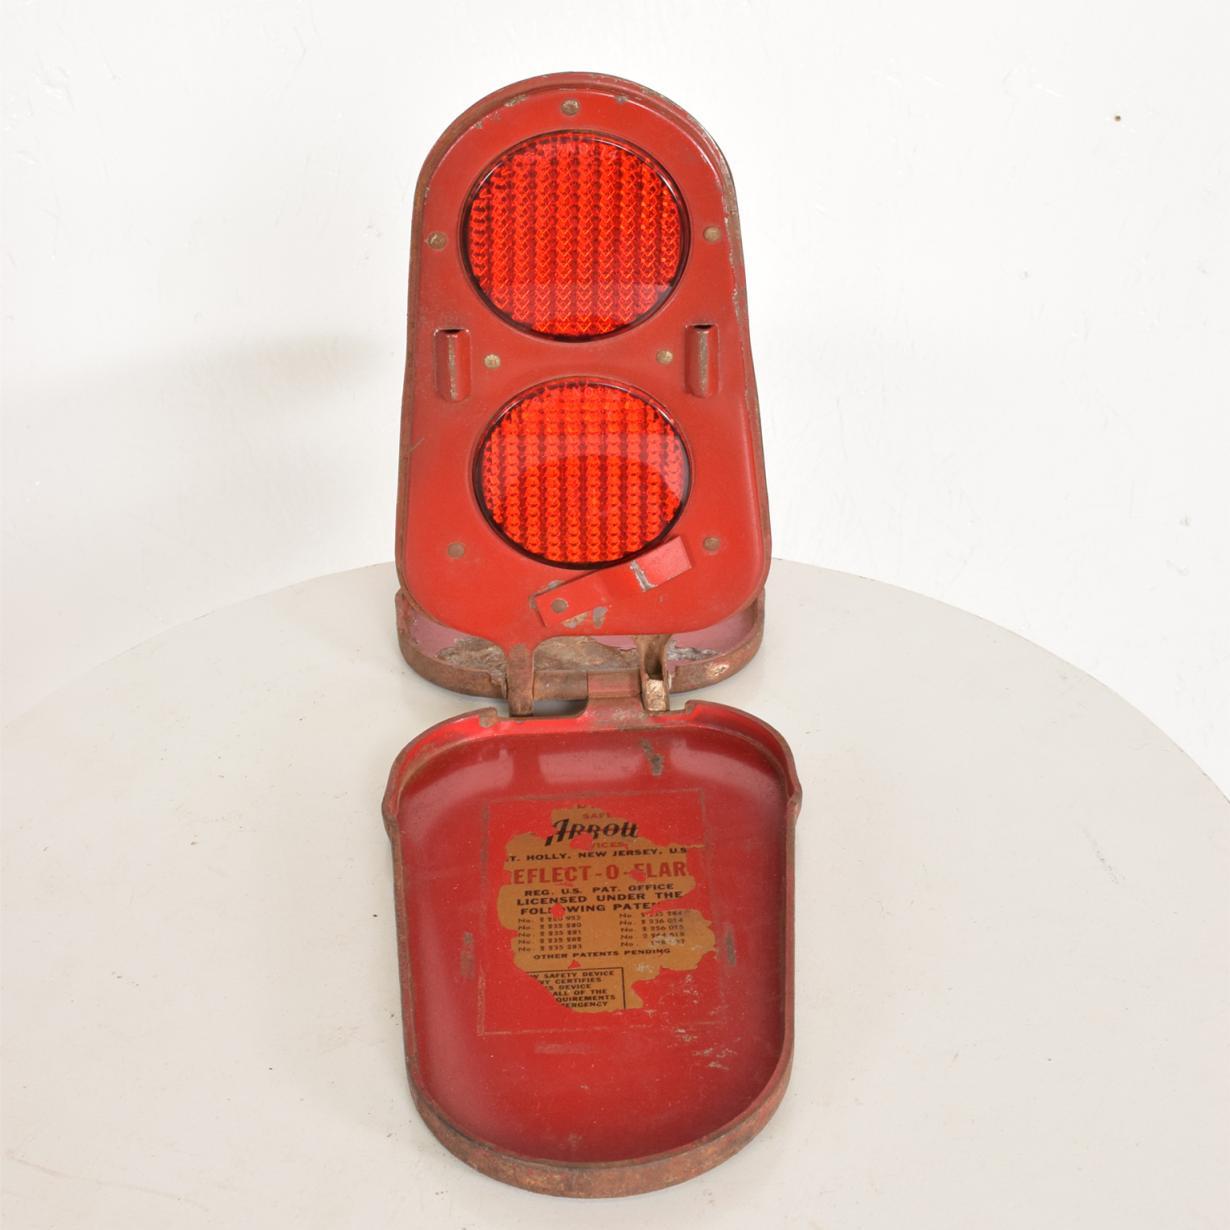 For your consideration, vintage automotive collectors reflector red, midcentury period.

Red paint has some oxidation. Metal body frame with reflector lights. It folds and closes in a small compact package. 

Dimensions: 10